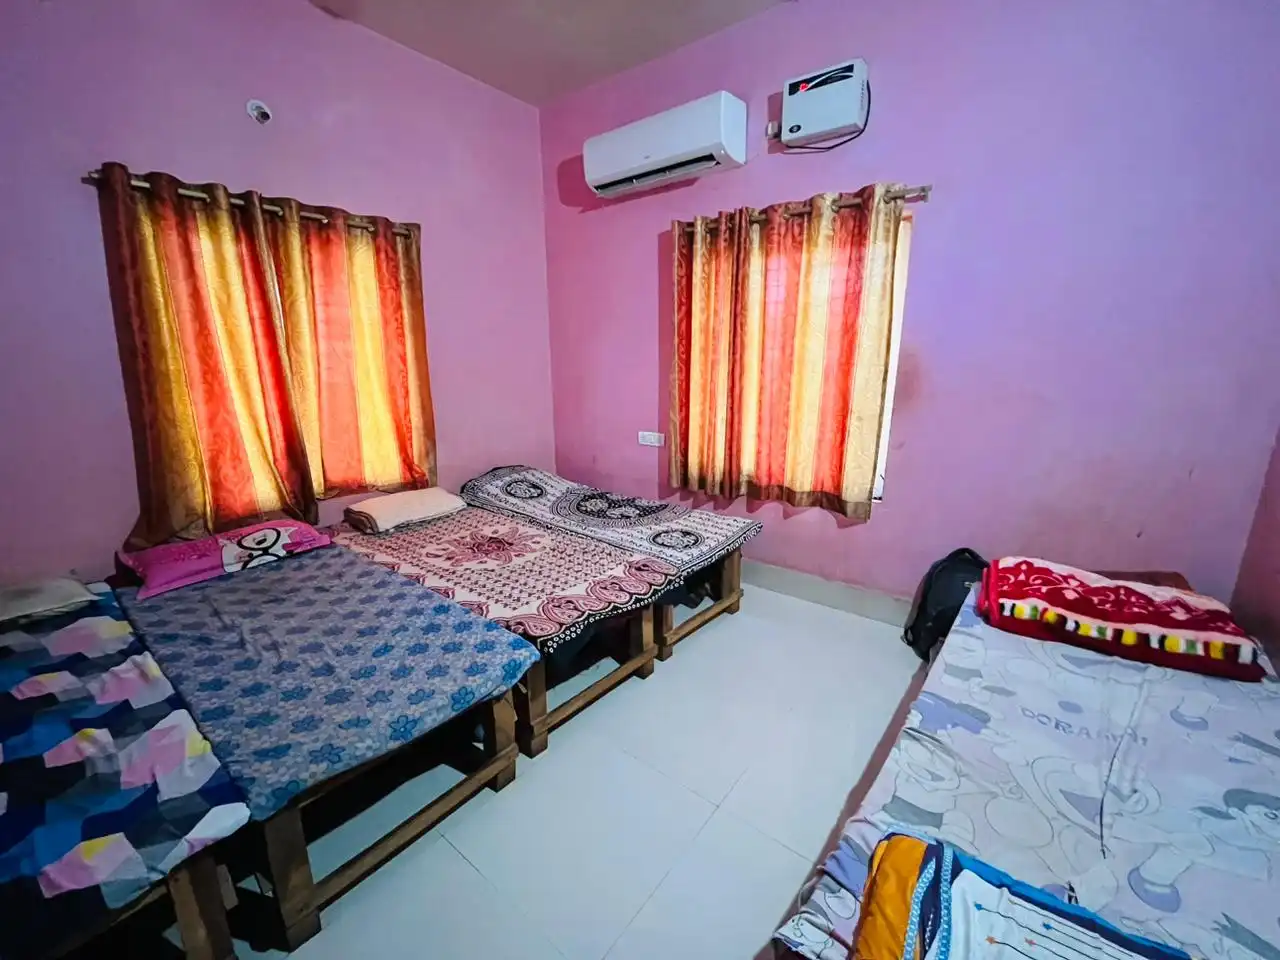 Faith Deaddction Center - Gallery Image | Bedrooms View